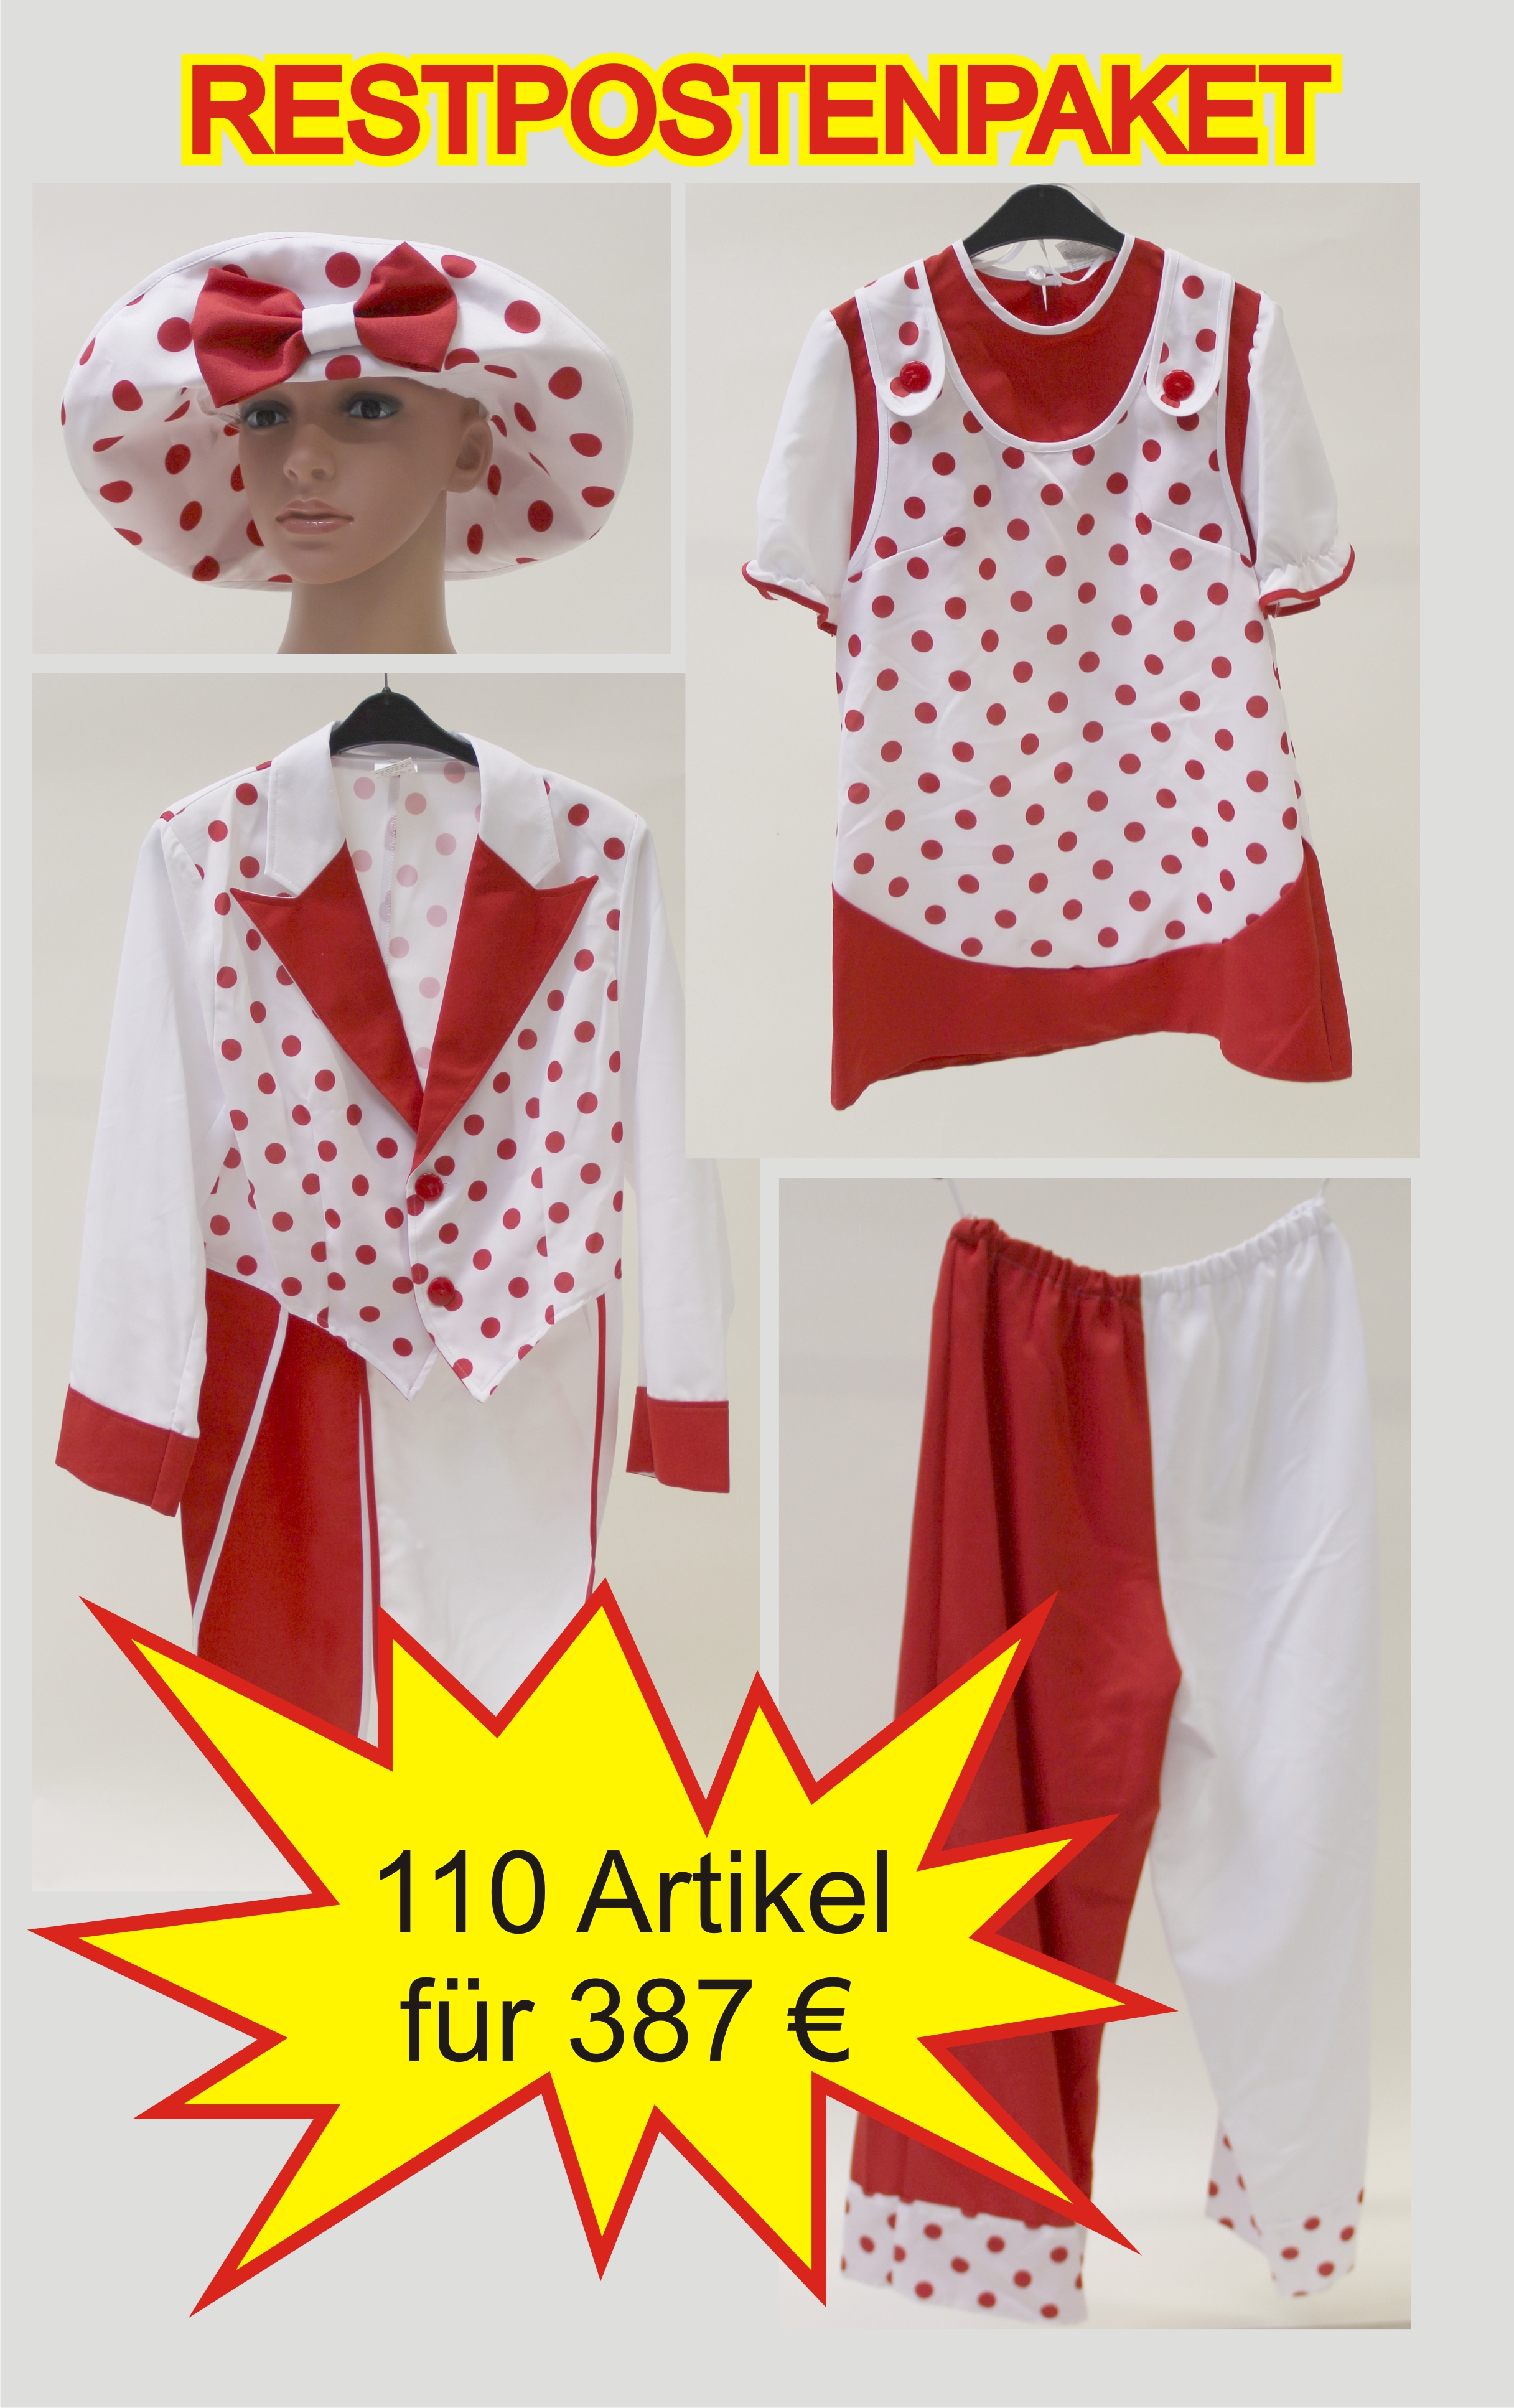 Special item package clown red - white